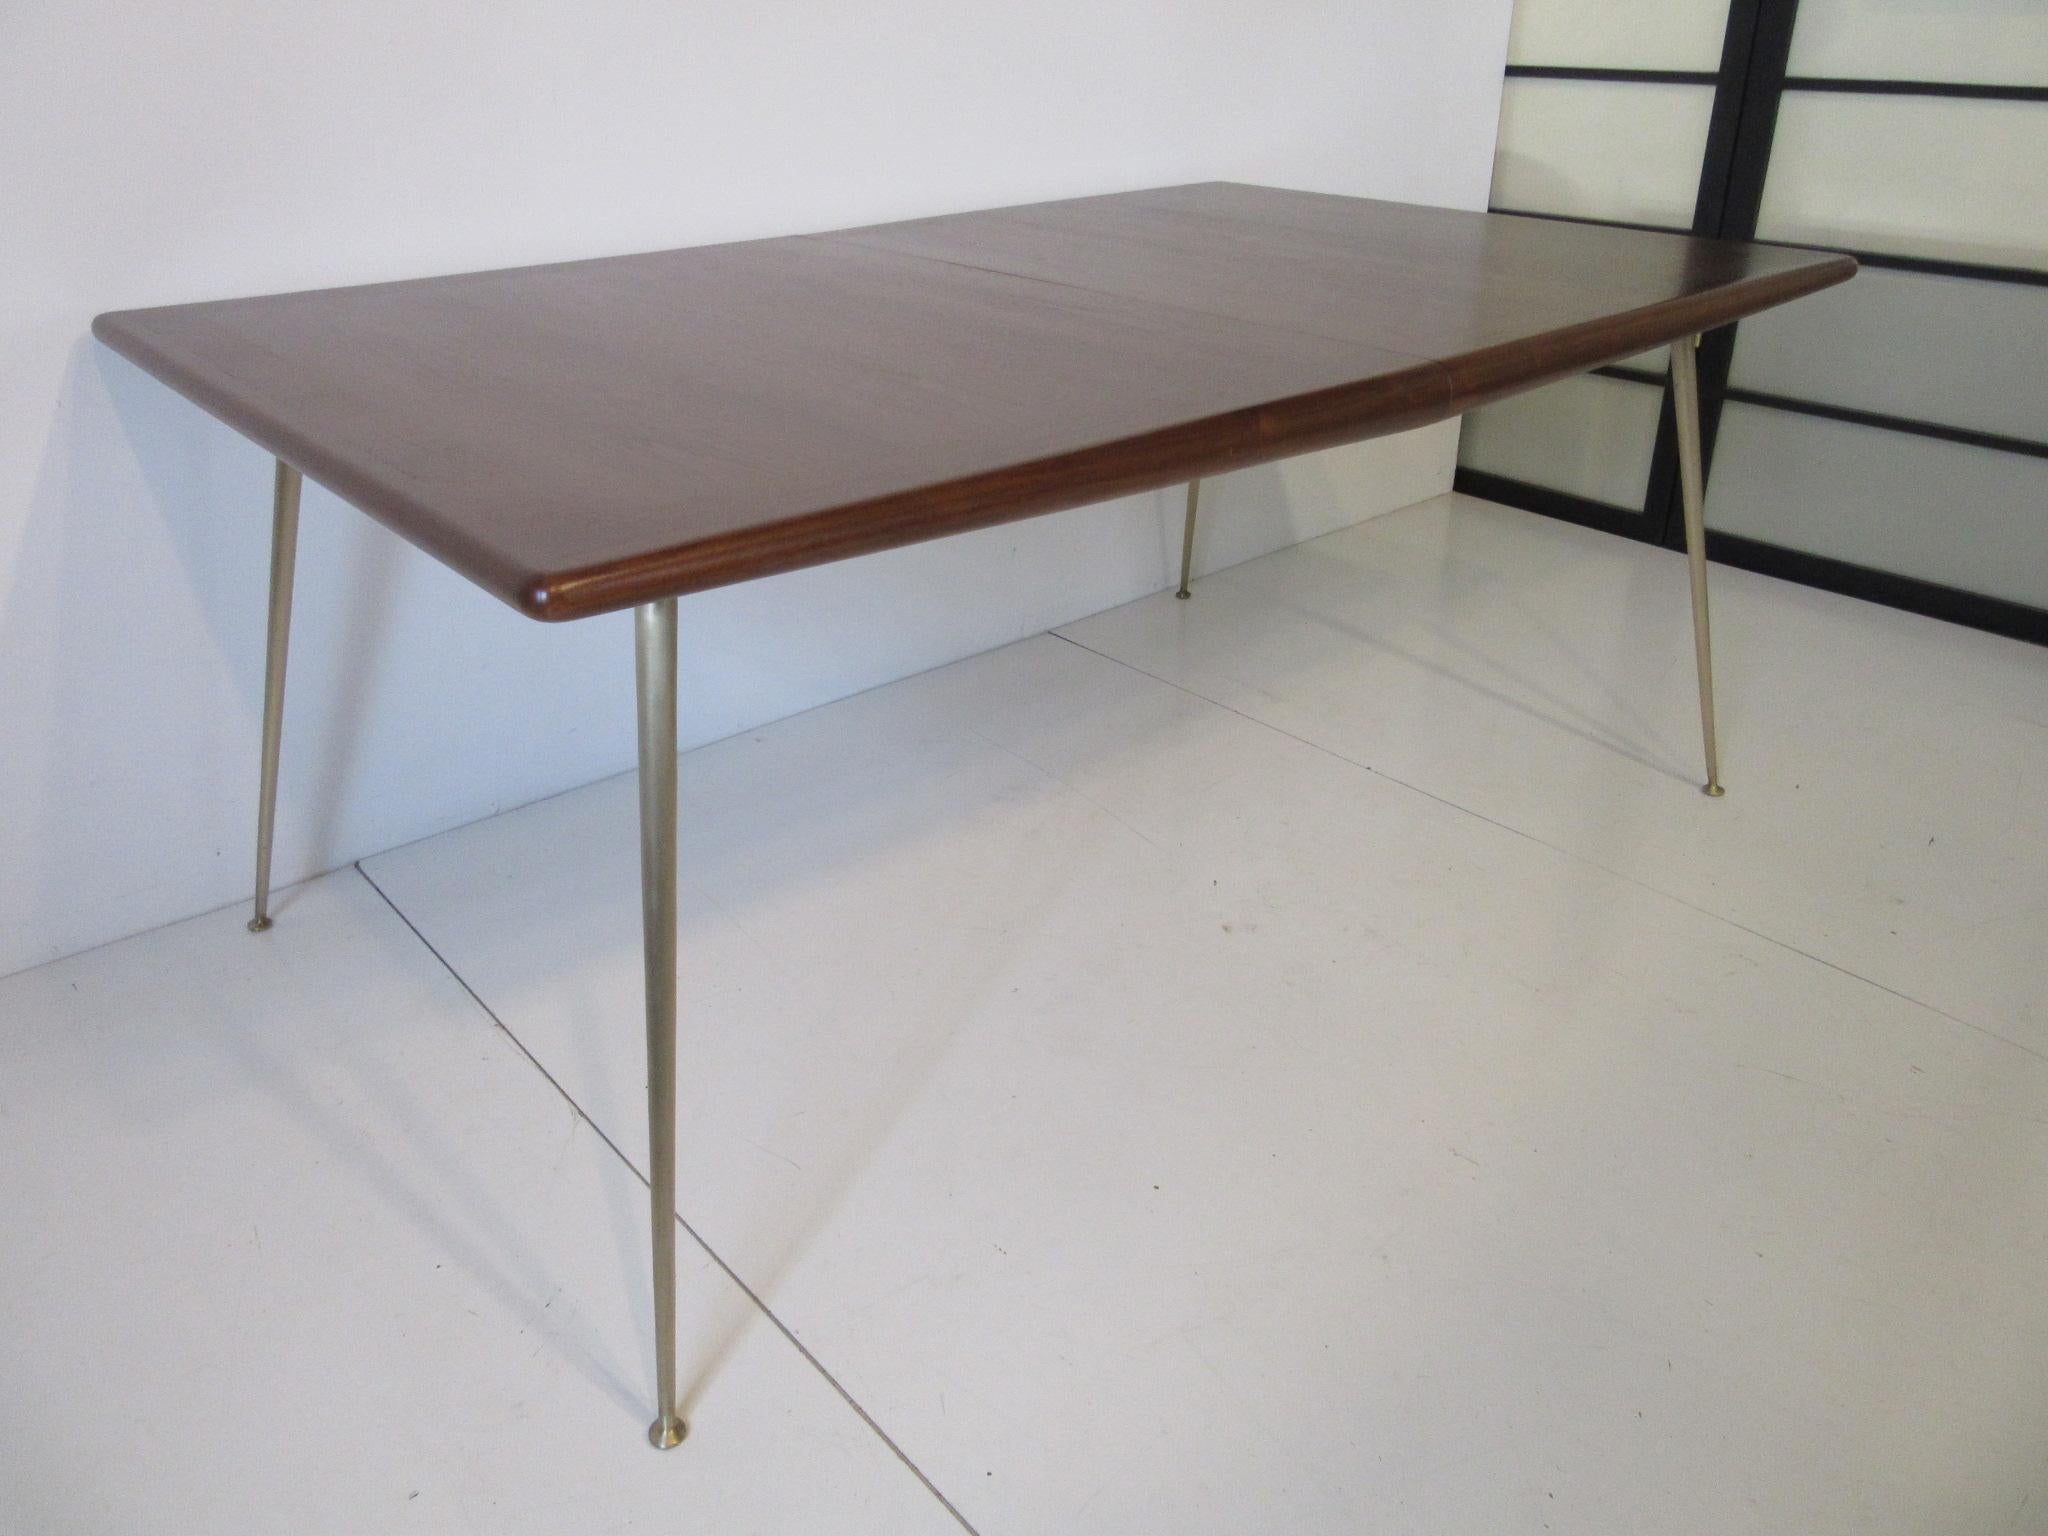 A well crafted walnut dining table with bull nose edge sitting on solid polished satin brass legs, a hard to find piece because of its cost in the 1950s and only found in the fineness of homes . This table was purchased from the original owners and